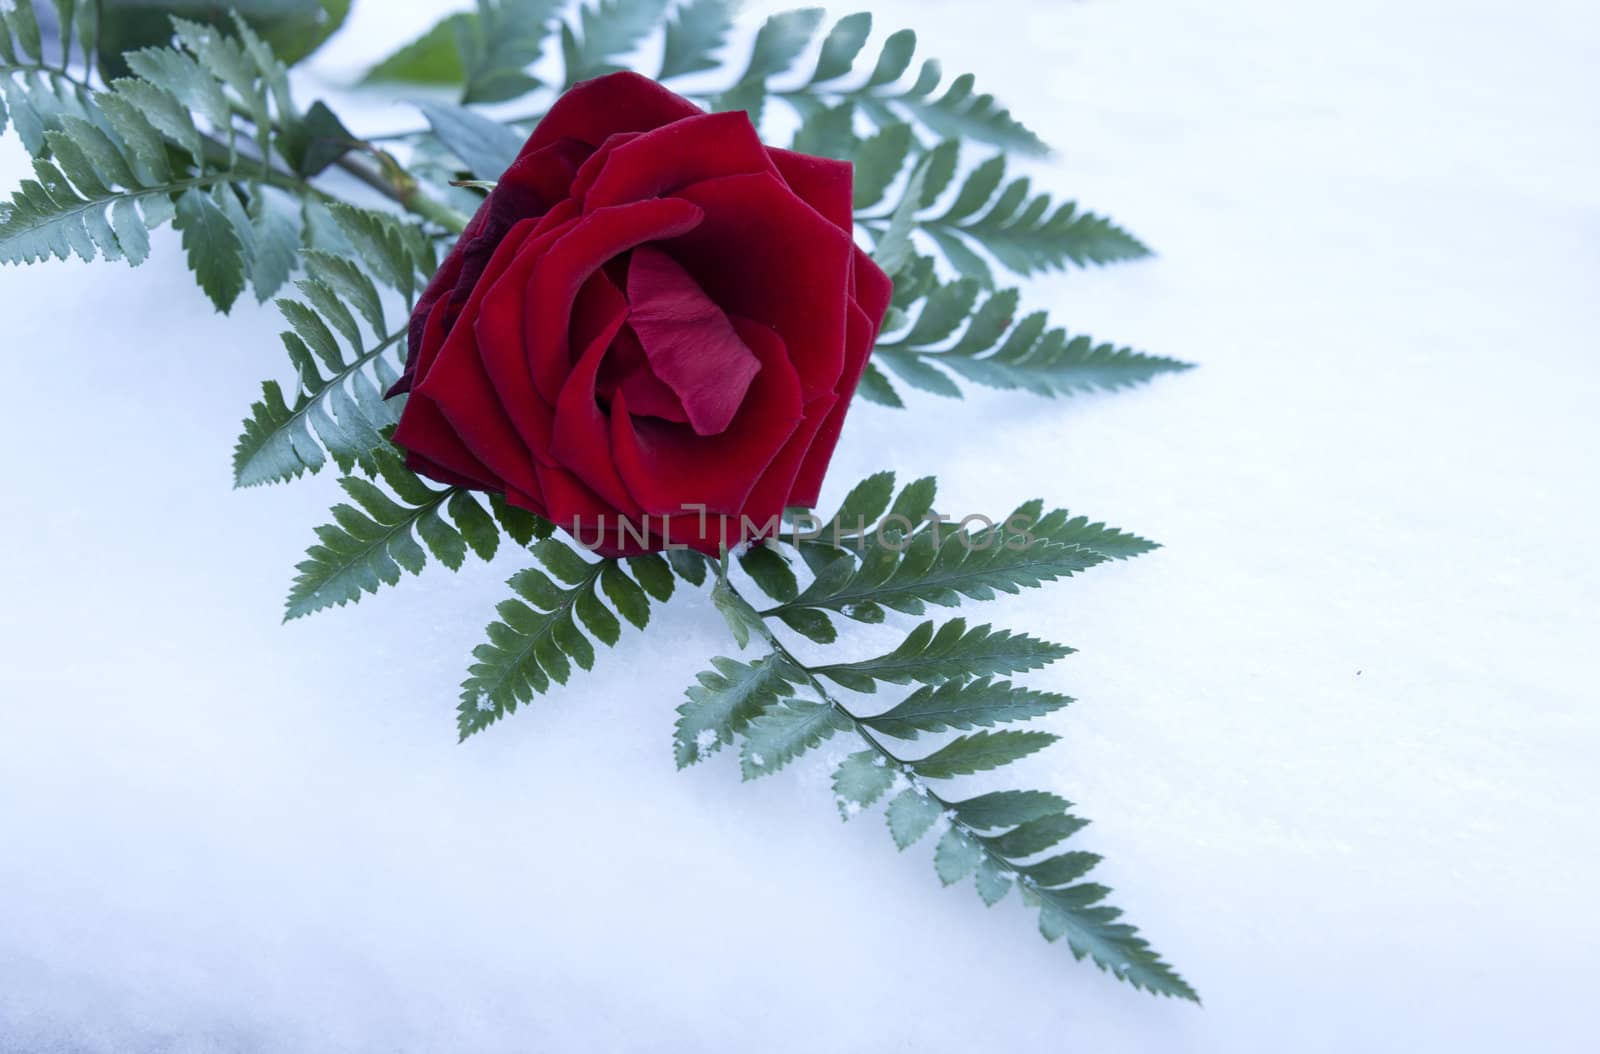 red rose and green leave in winter snow